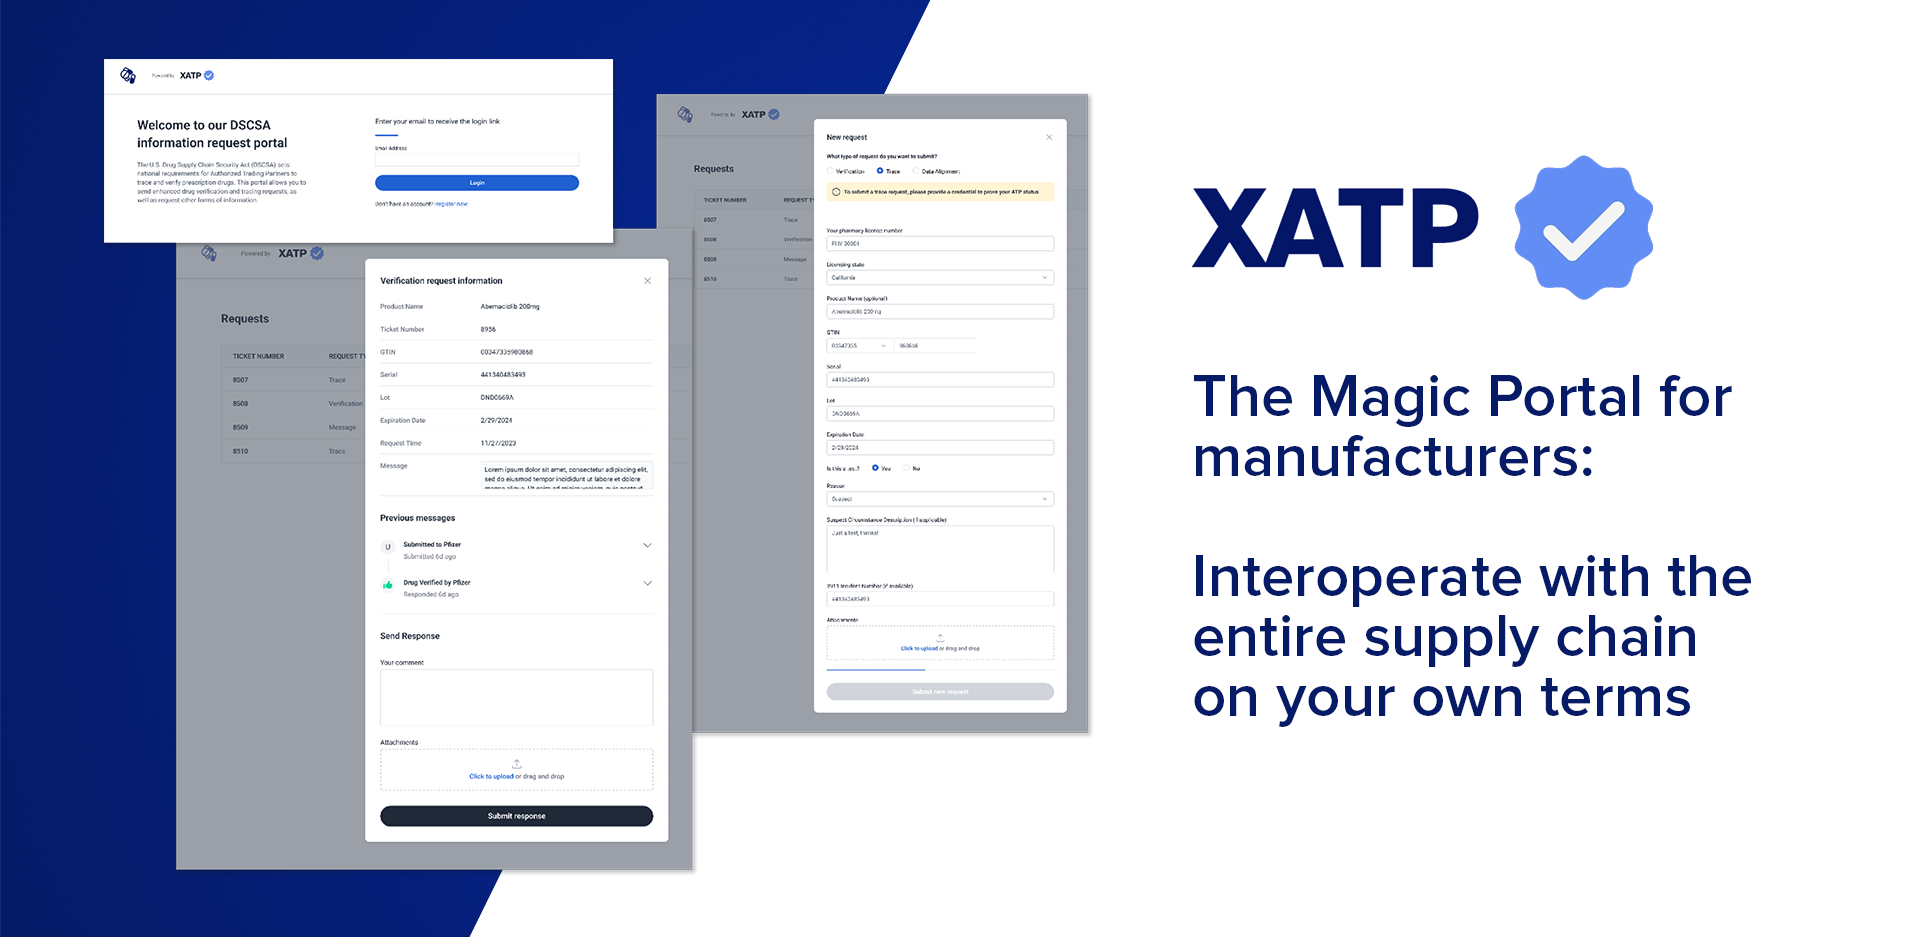 The Magic Portal for manufacturers: Interoperate with the entire supply chain on your own terms